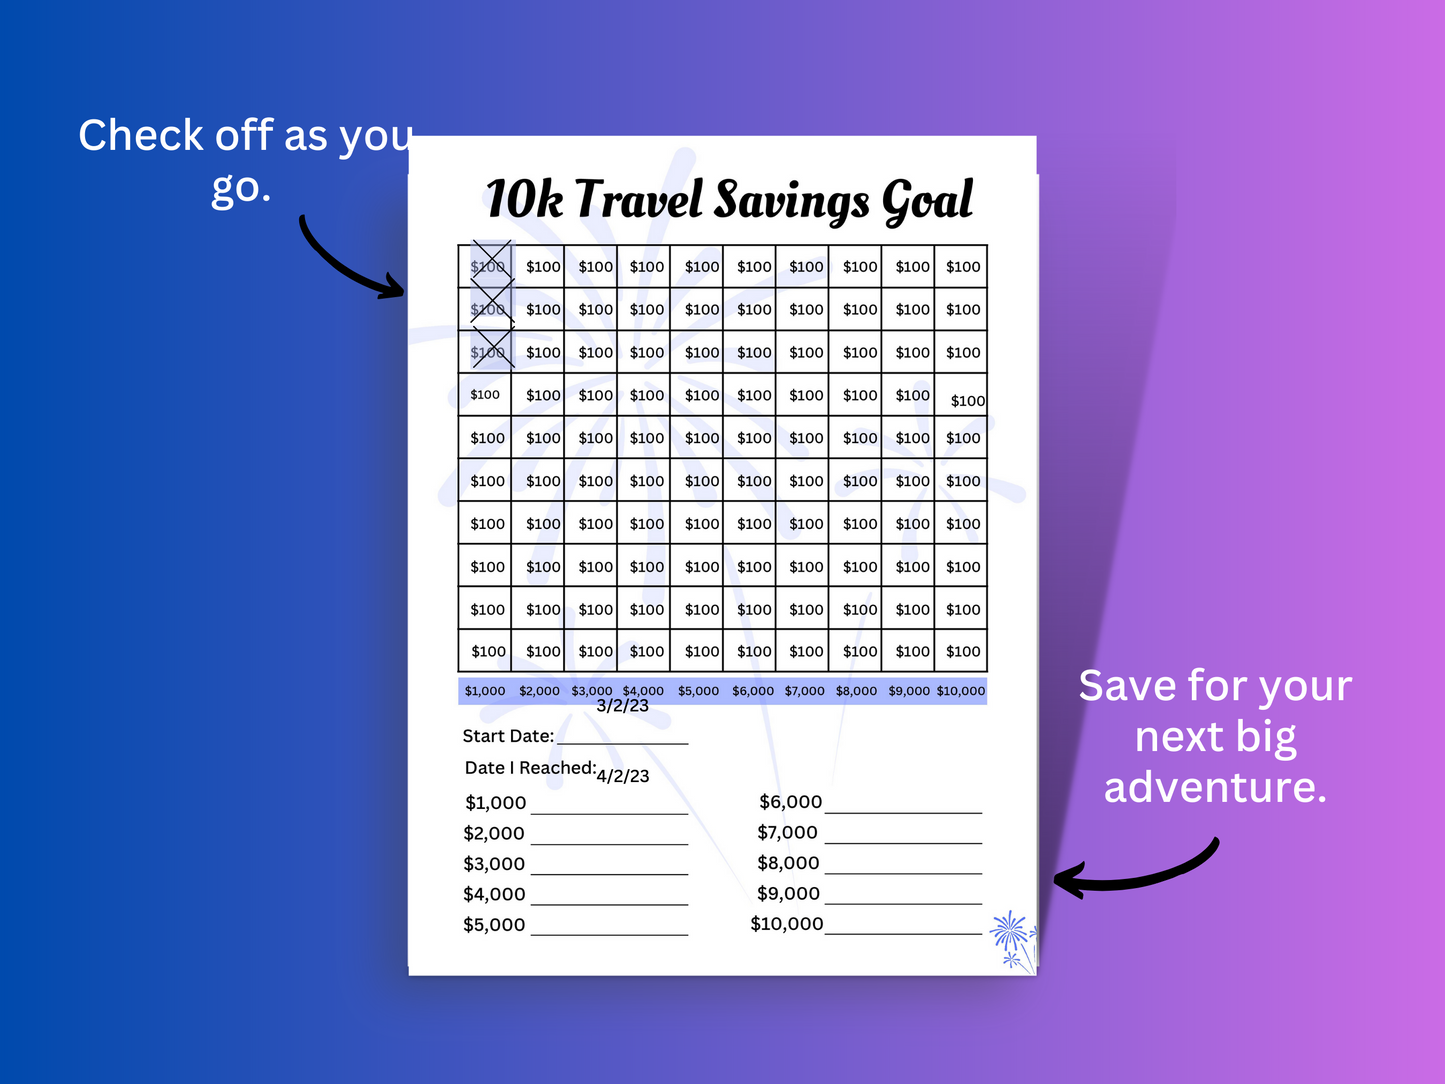 10k Travel savings goal printable showing how to mark off the boxes as you go with color or x marks or both.